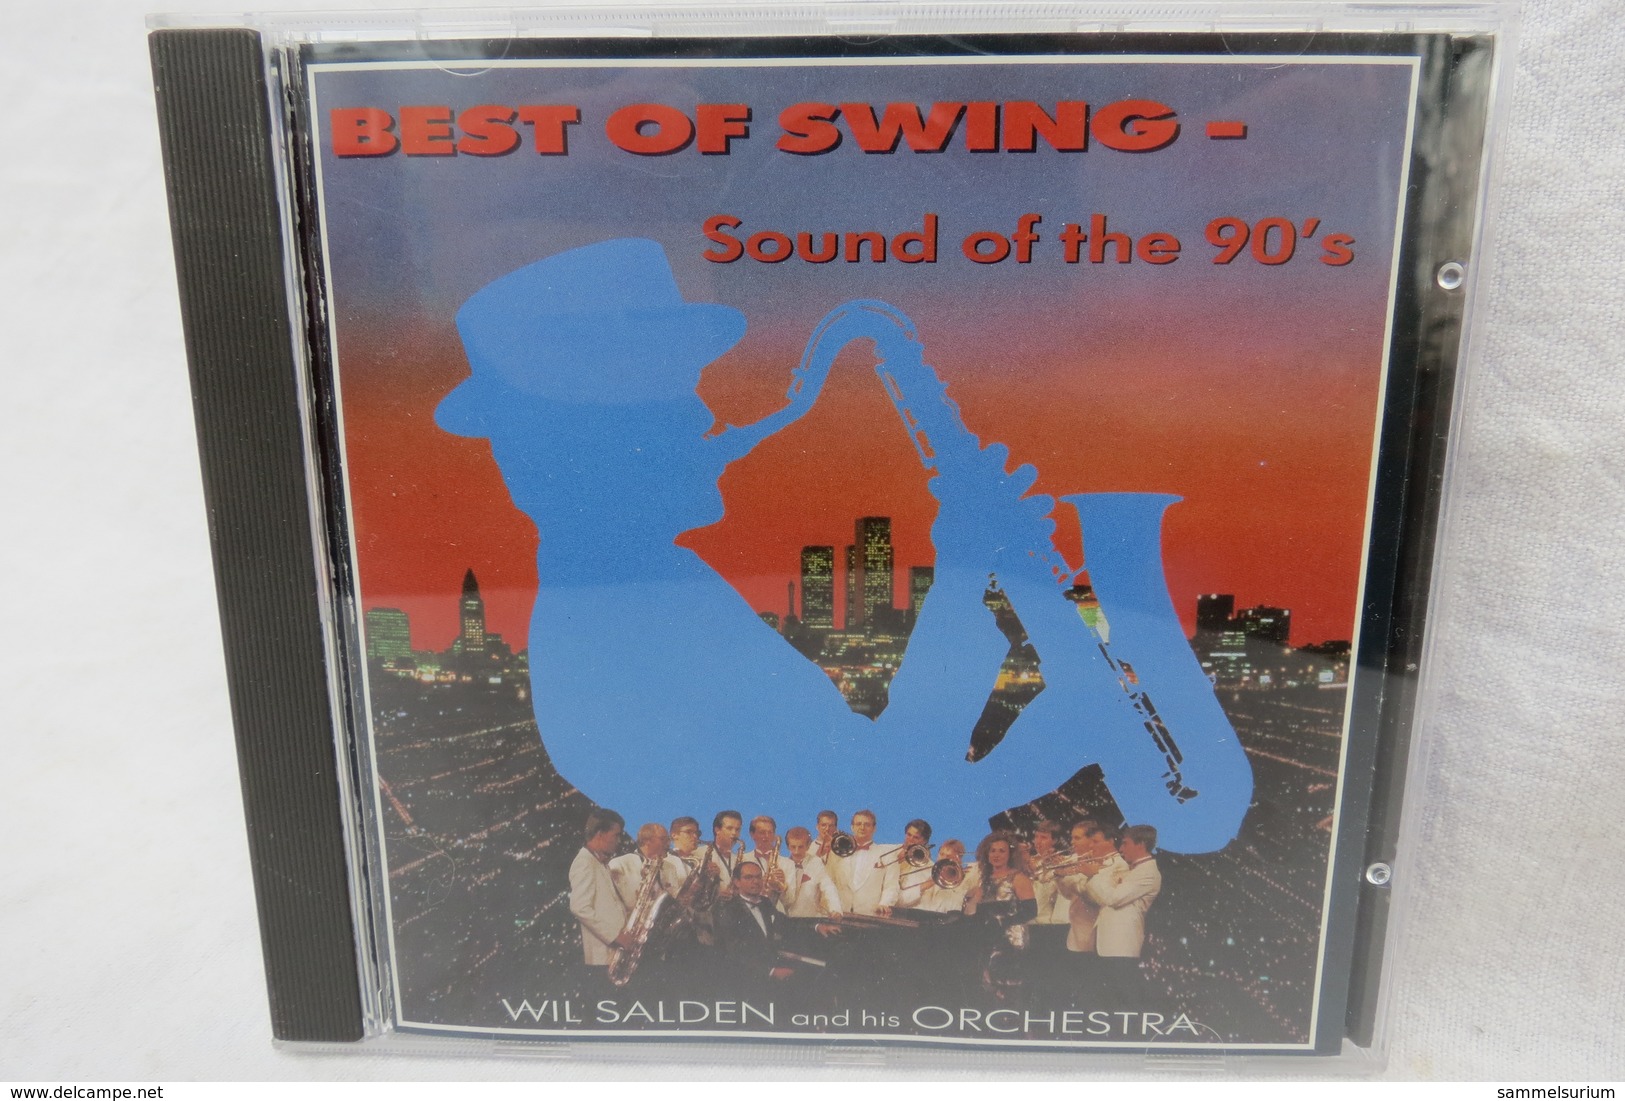 CD "Wil Salden And His Orchestra" Best Of Swing - Sound Of The 90's - Soul - R&B